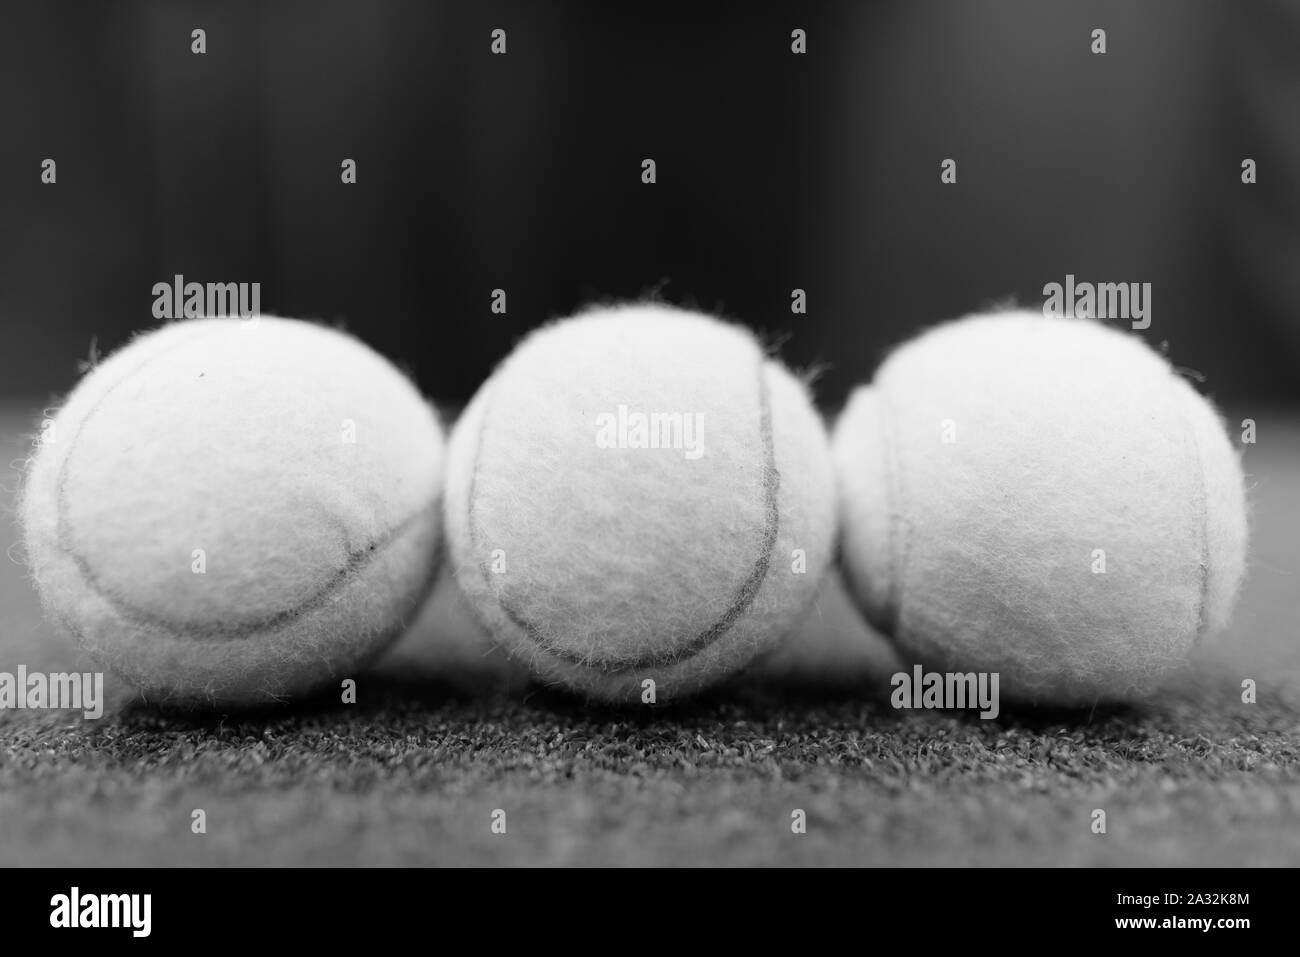 Tennis Balls On Ground Shot in Black And White Stock Photo